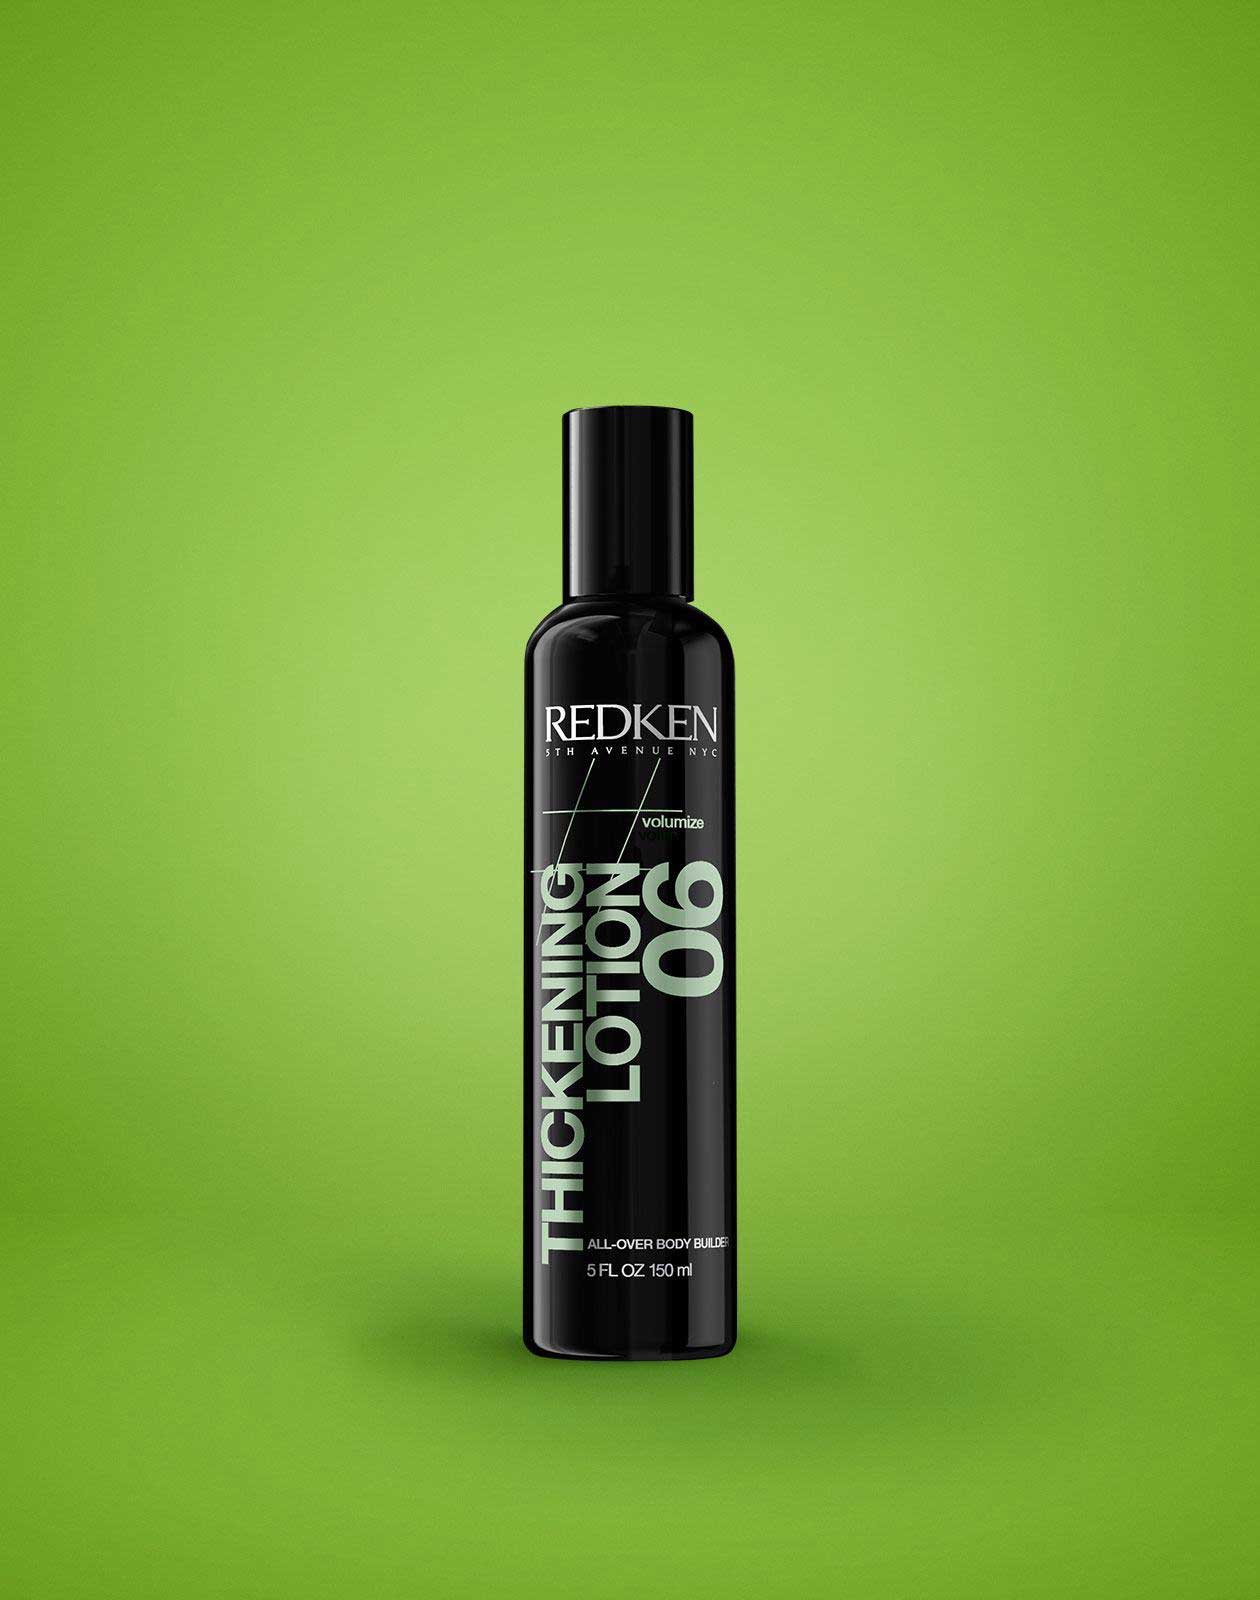 Redken Thickening Lotion 06 | For Fine Hair | Adds Weightless Body & Texture | Alcohol-Free 5 Fl Oz (Pack of 1)